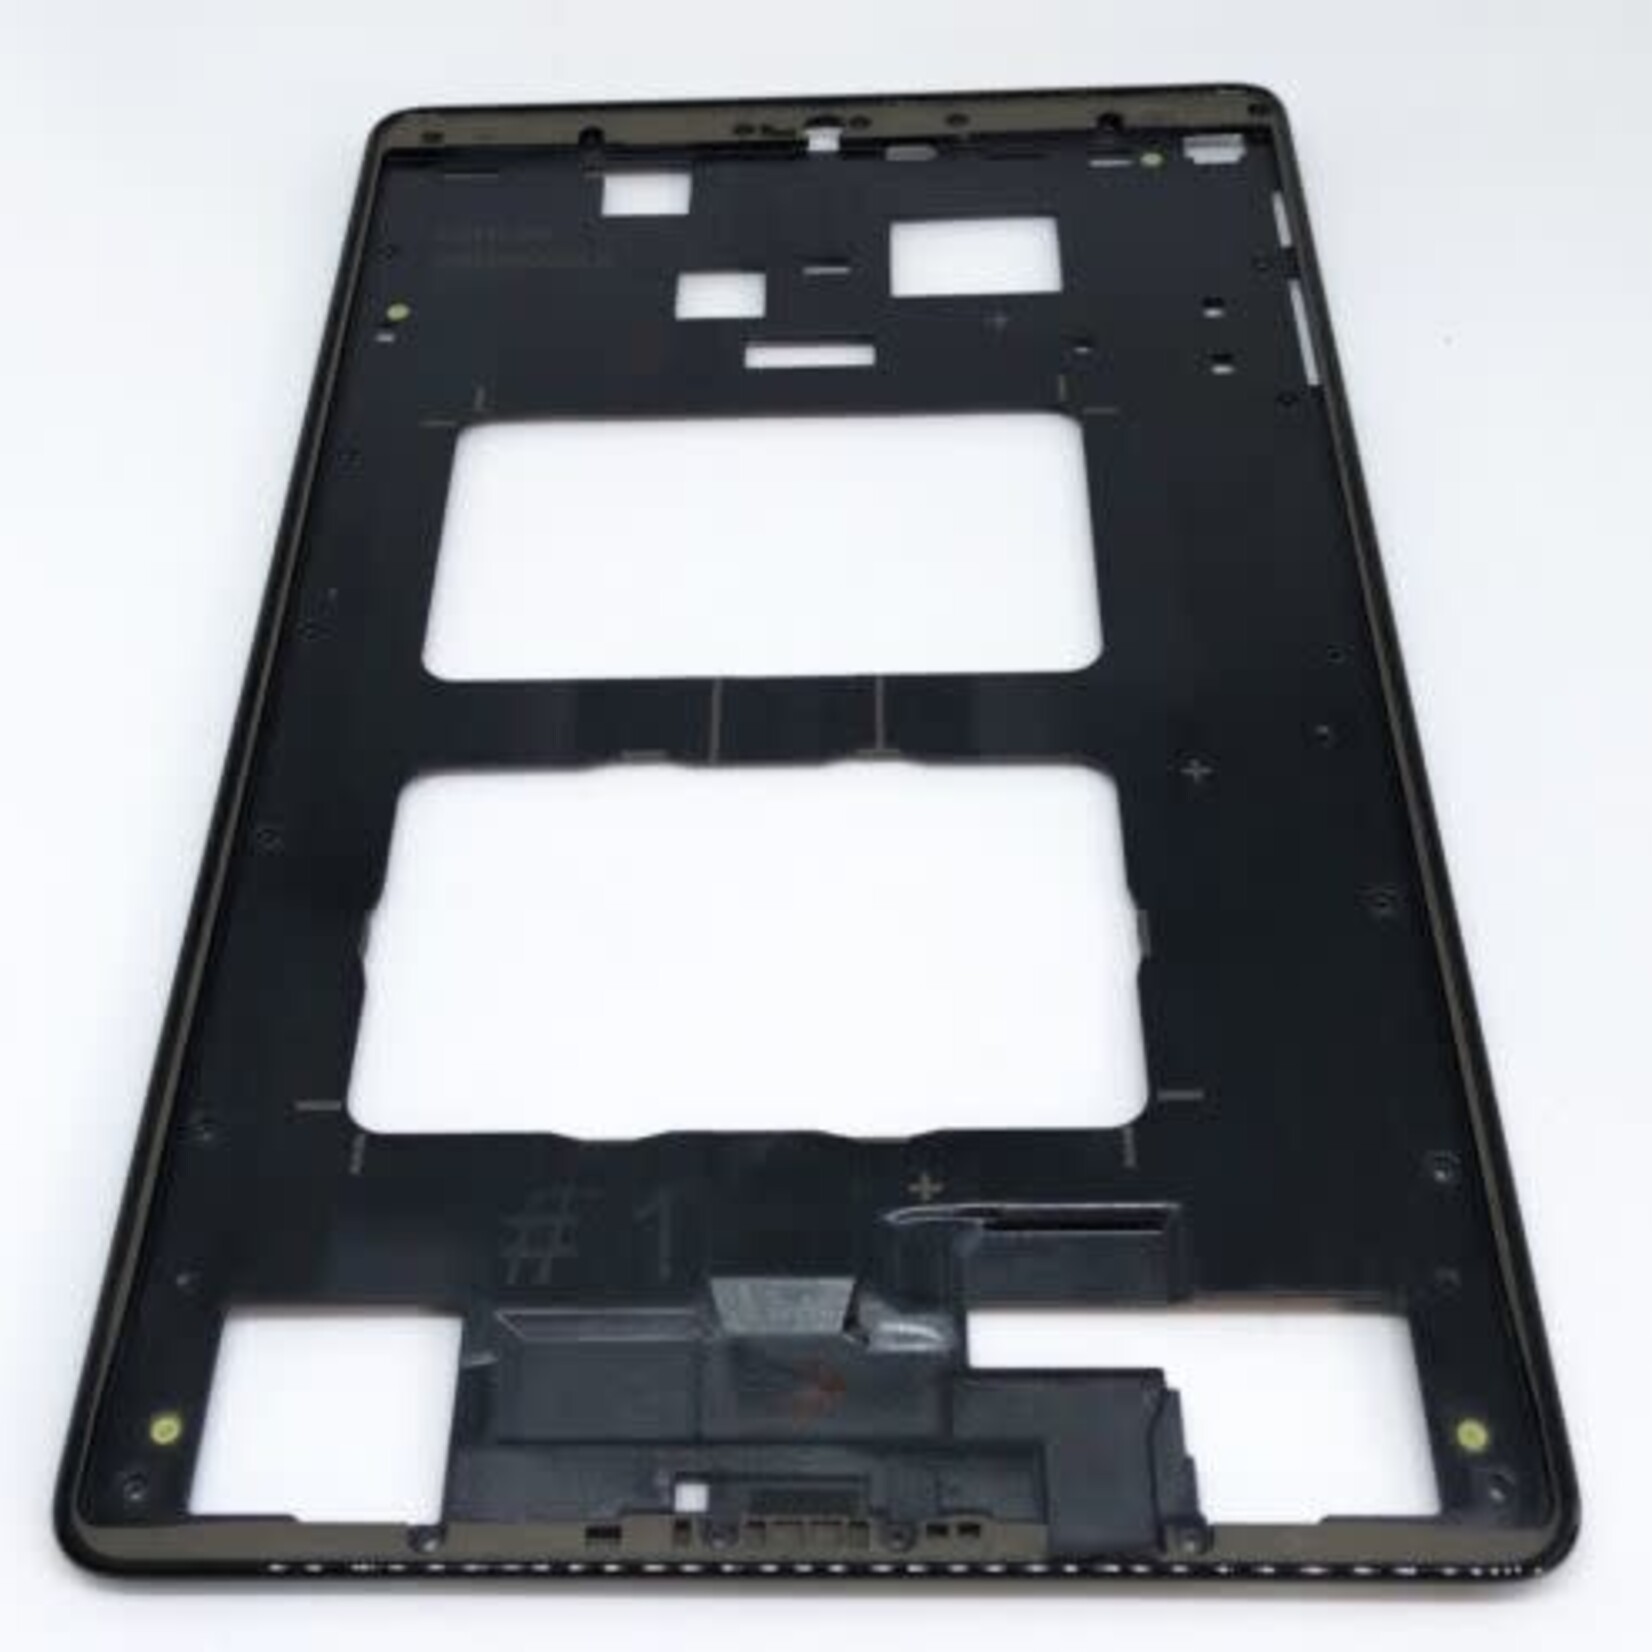 Samsung Plastic Middle Frame Bezel housing for Samsung Galaxy Tab A SM-T510 10.1” SM-T510